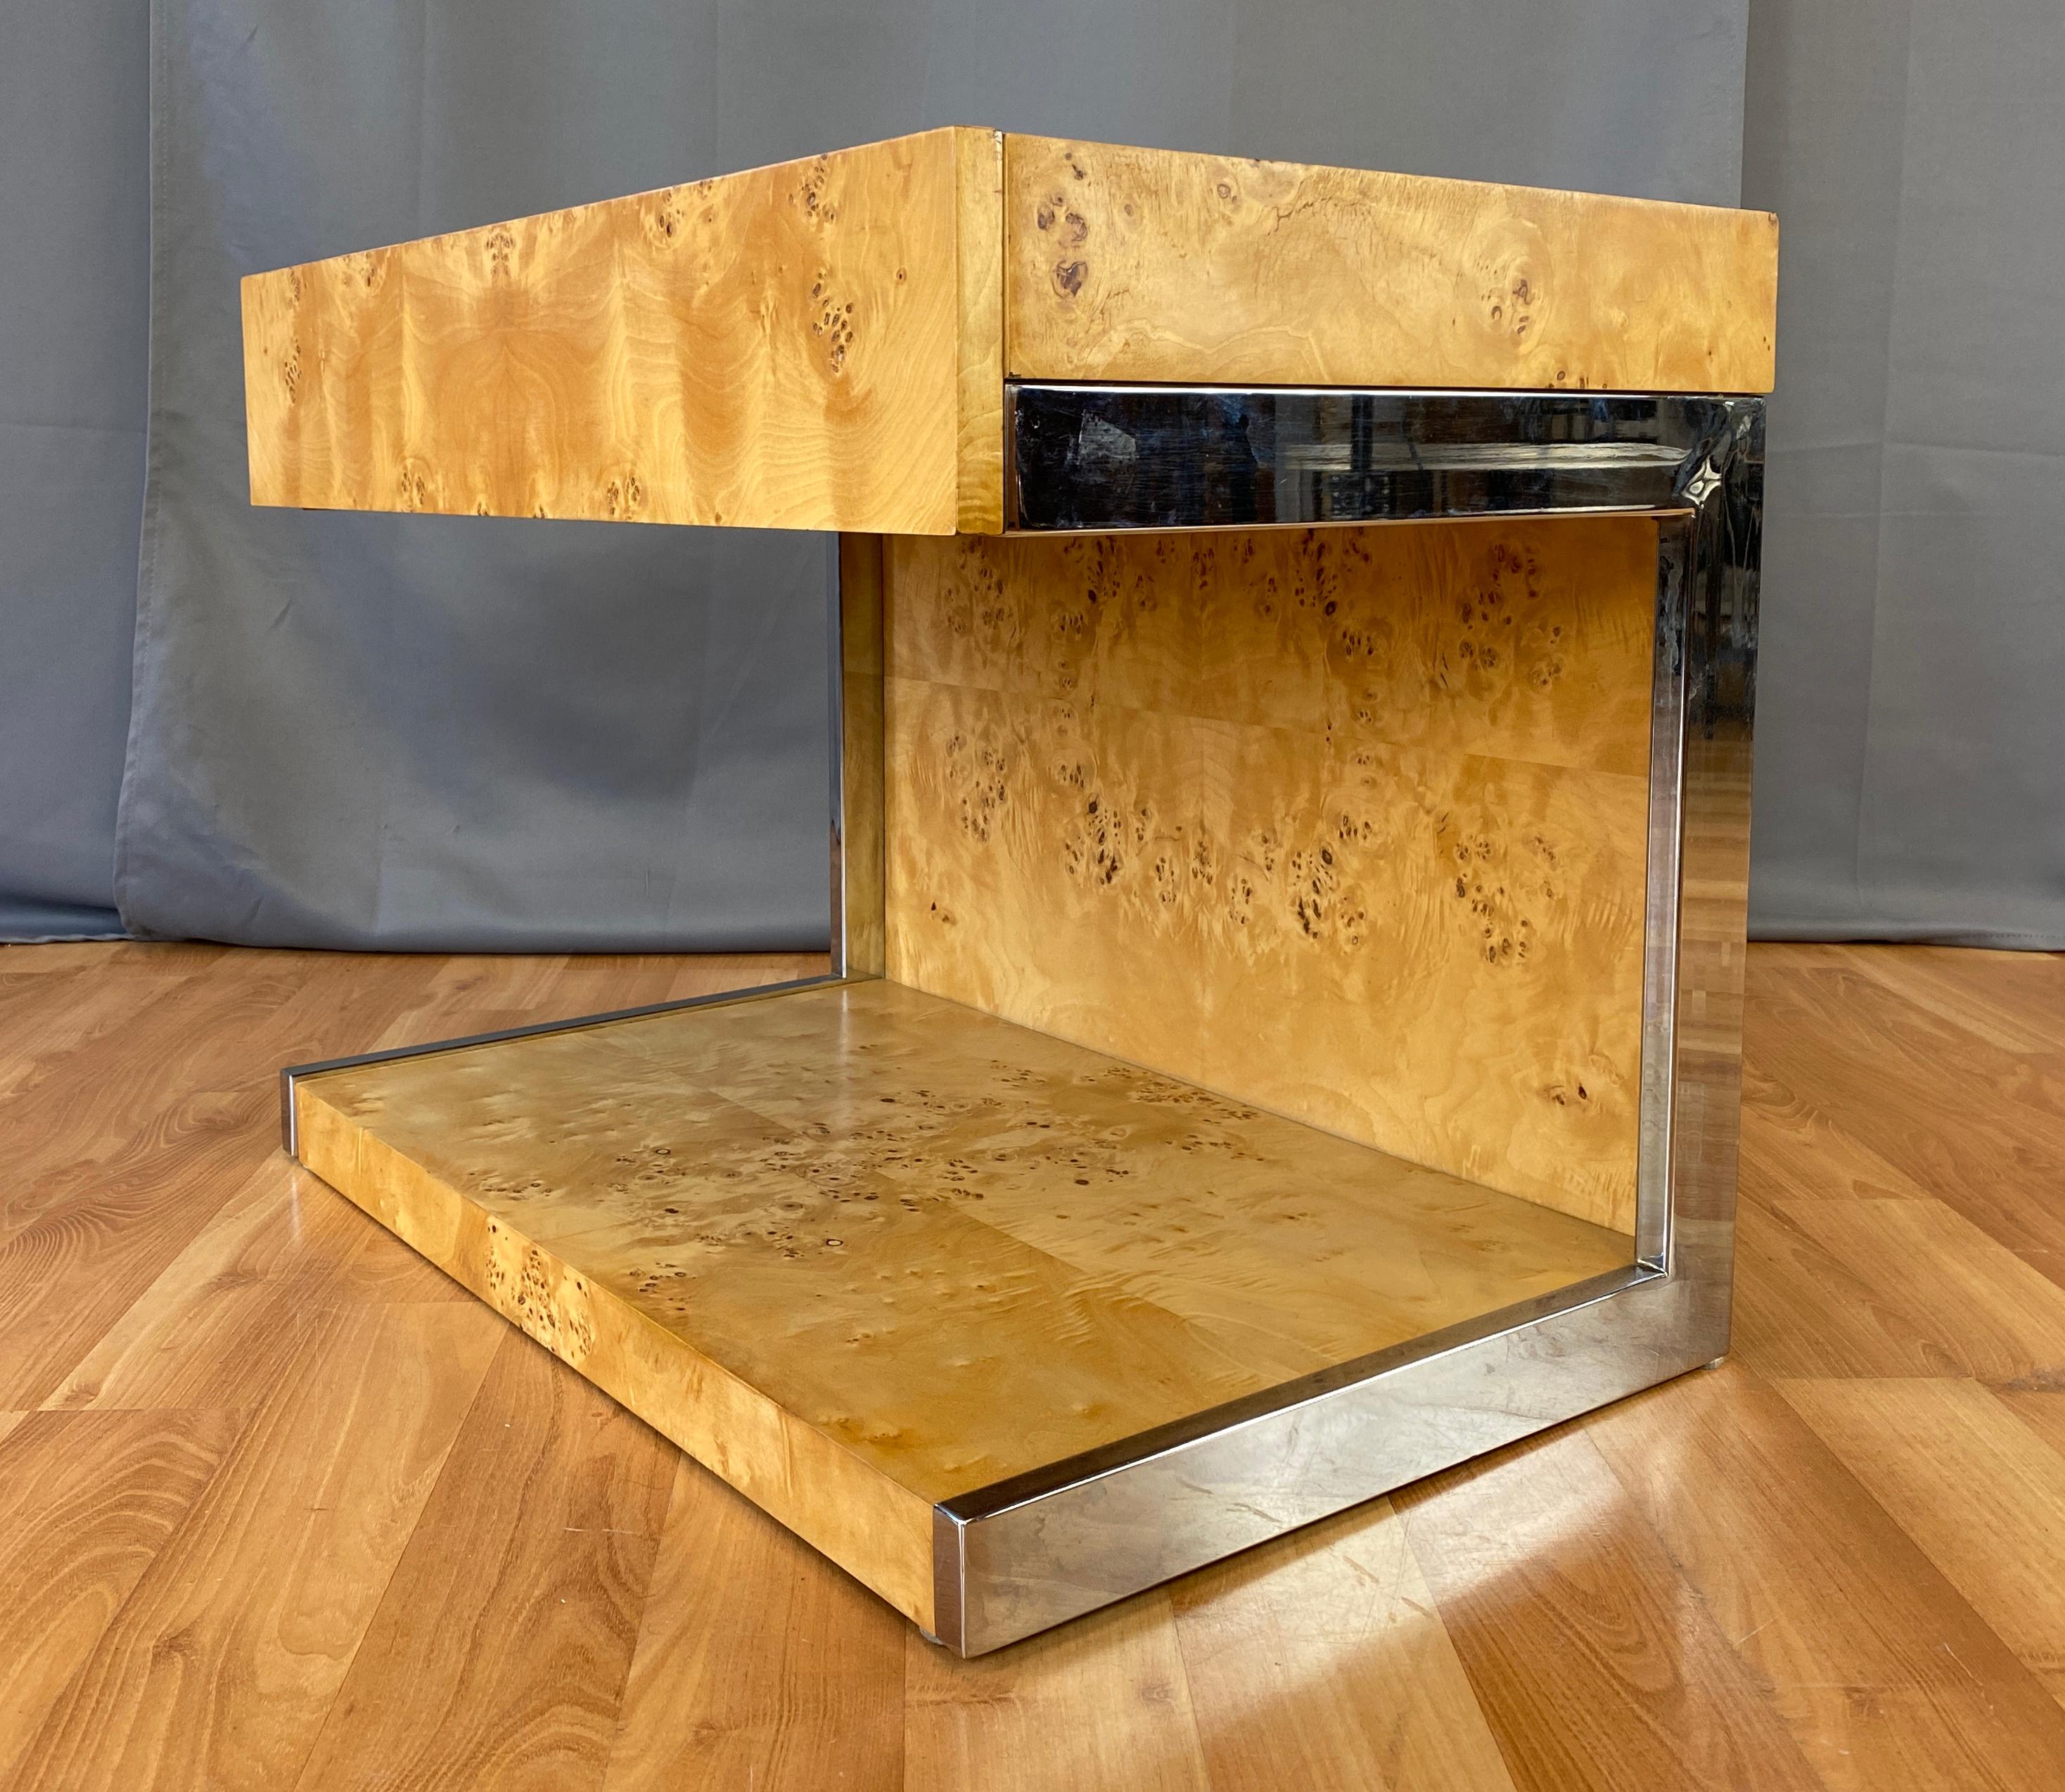 Offered here is a 1970s vintage burl-wood and chrome cantilevered side table, that would make a nice nightstand also.
Has no markings, but it's in the style of Milo Baughman's work for Lane. 
Main body is burl-wood that we believe is Maple, the